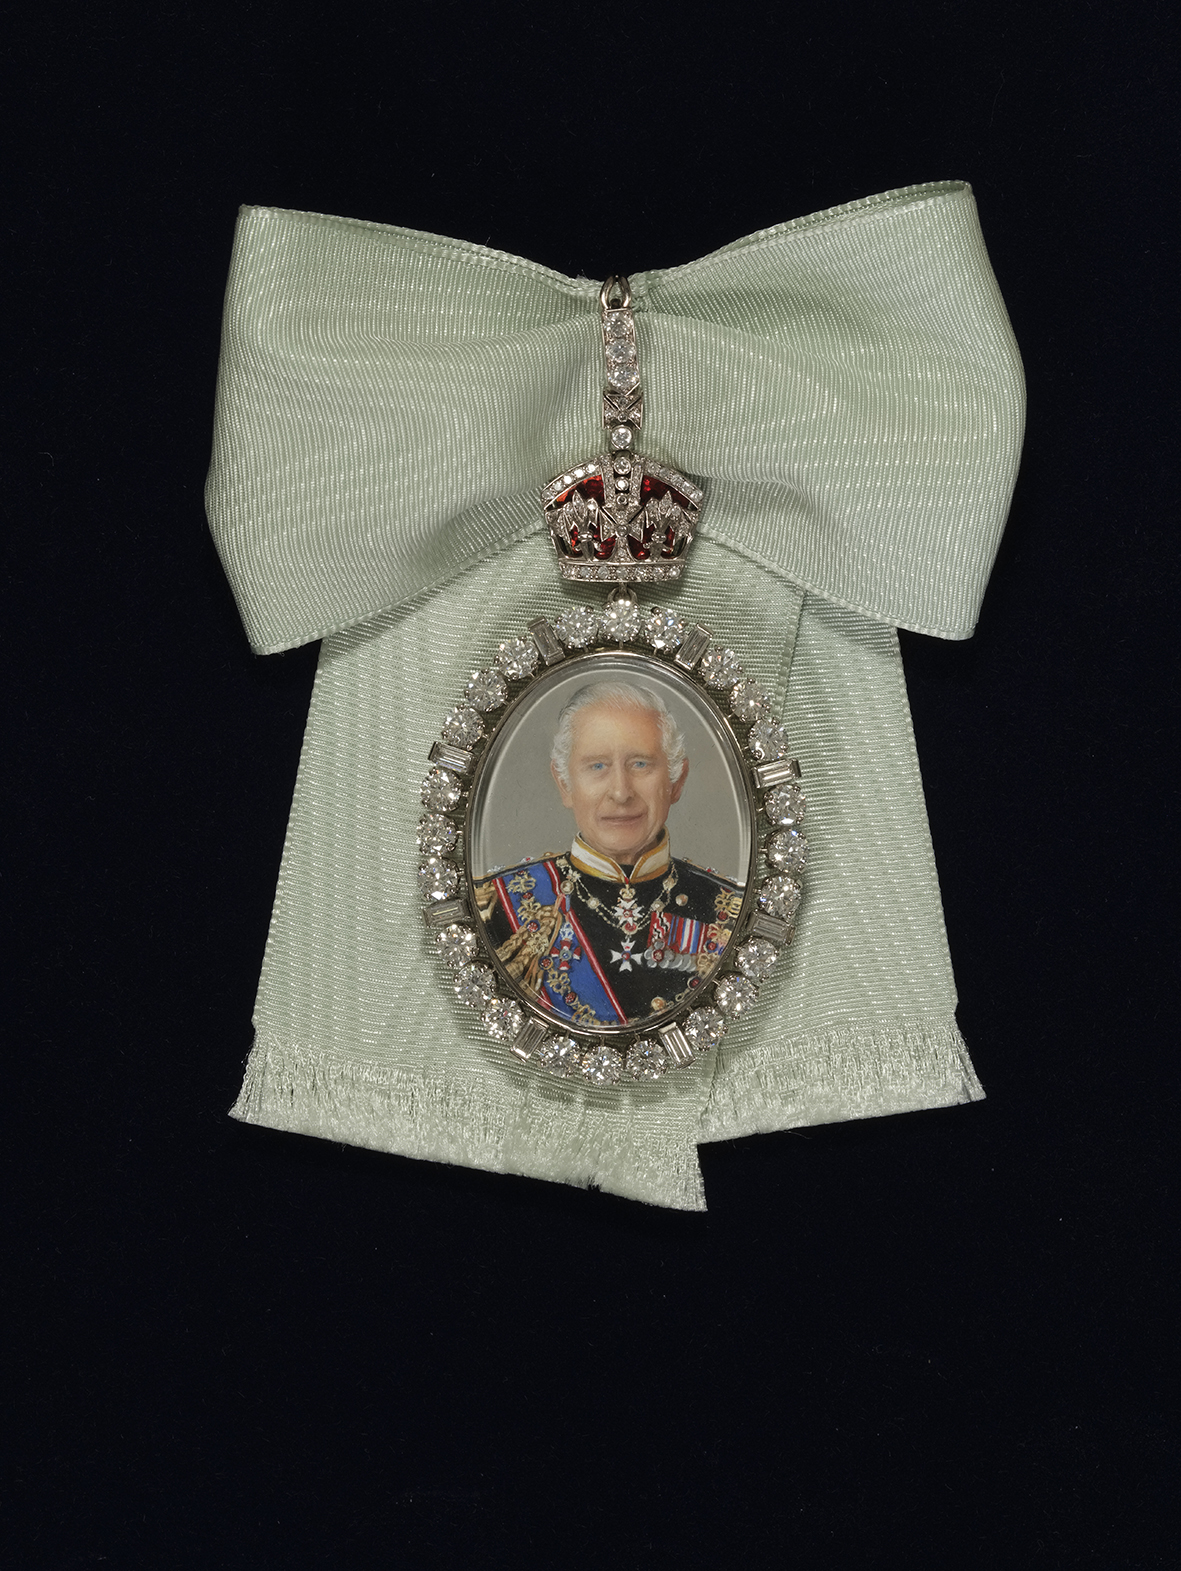 The new King Charles III Family Order